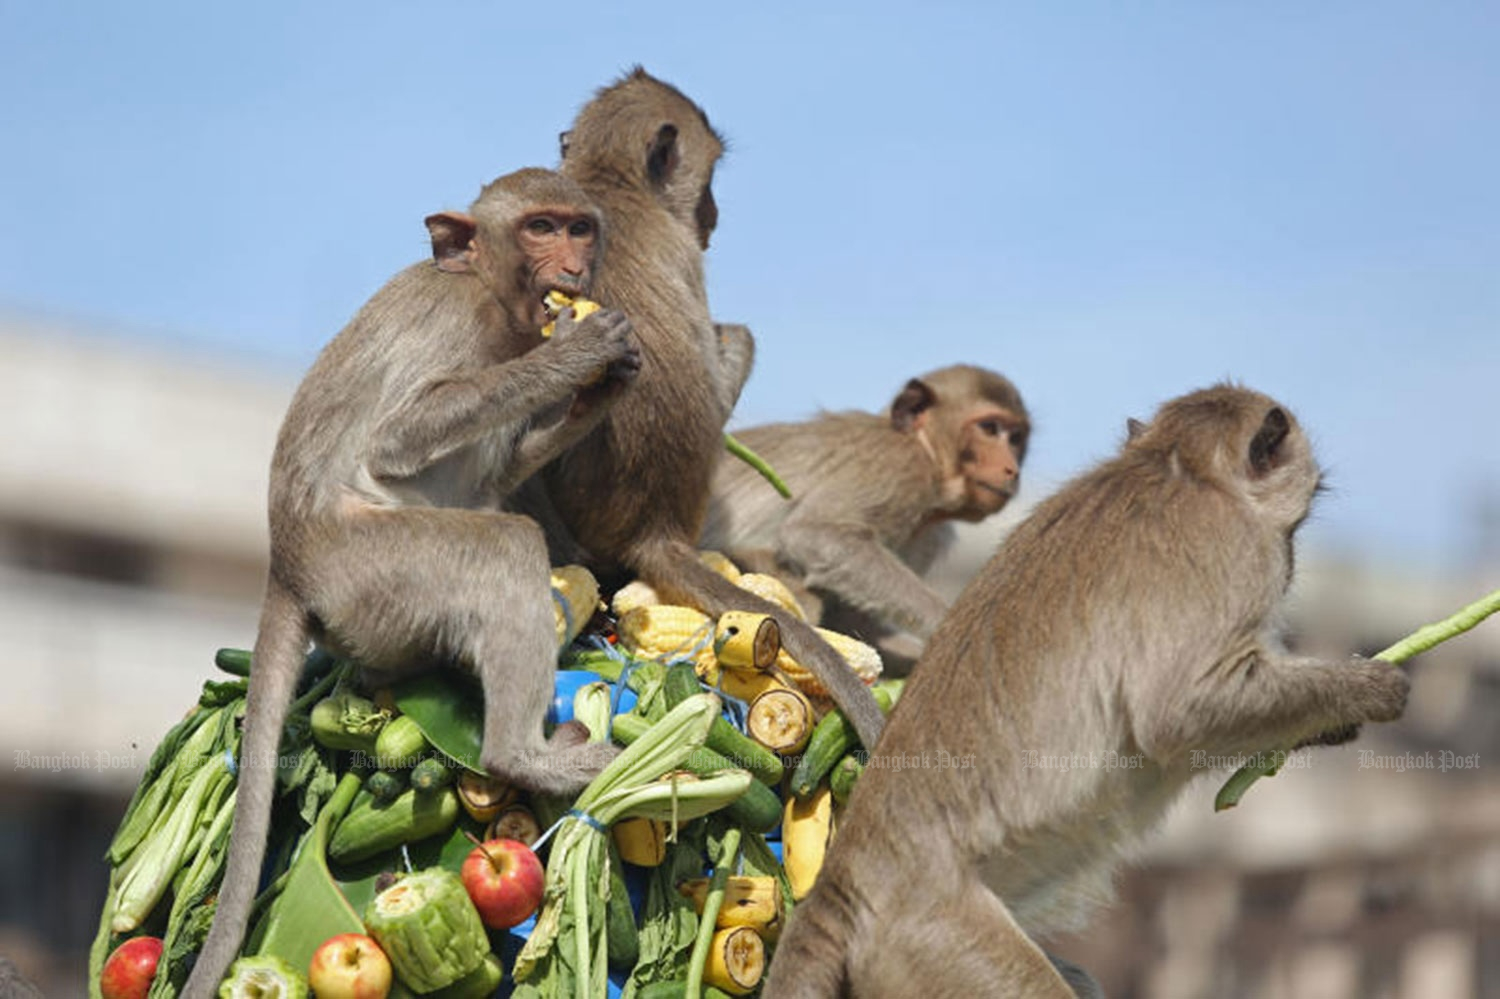 Taming the Urban Jungle: Lopburi’s Innovative Approach to Managing Its Macaque Population